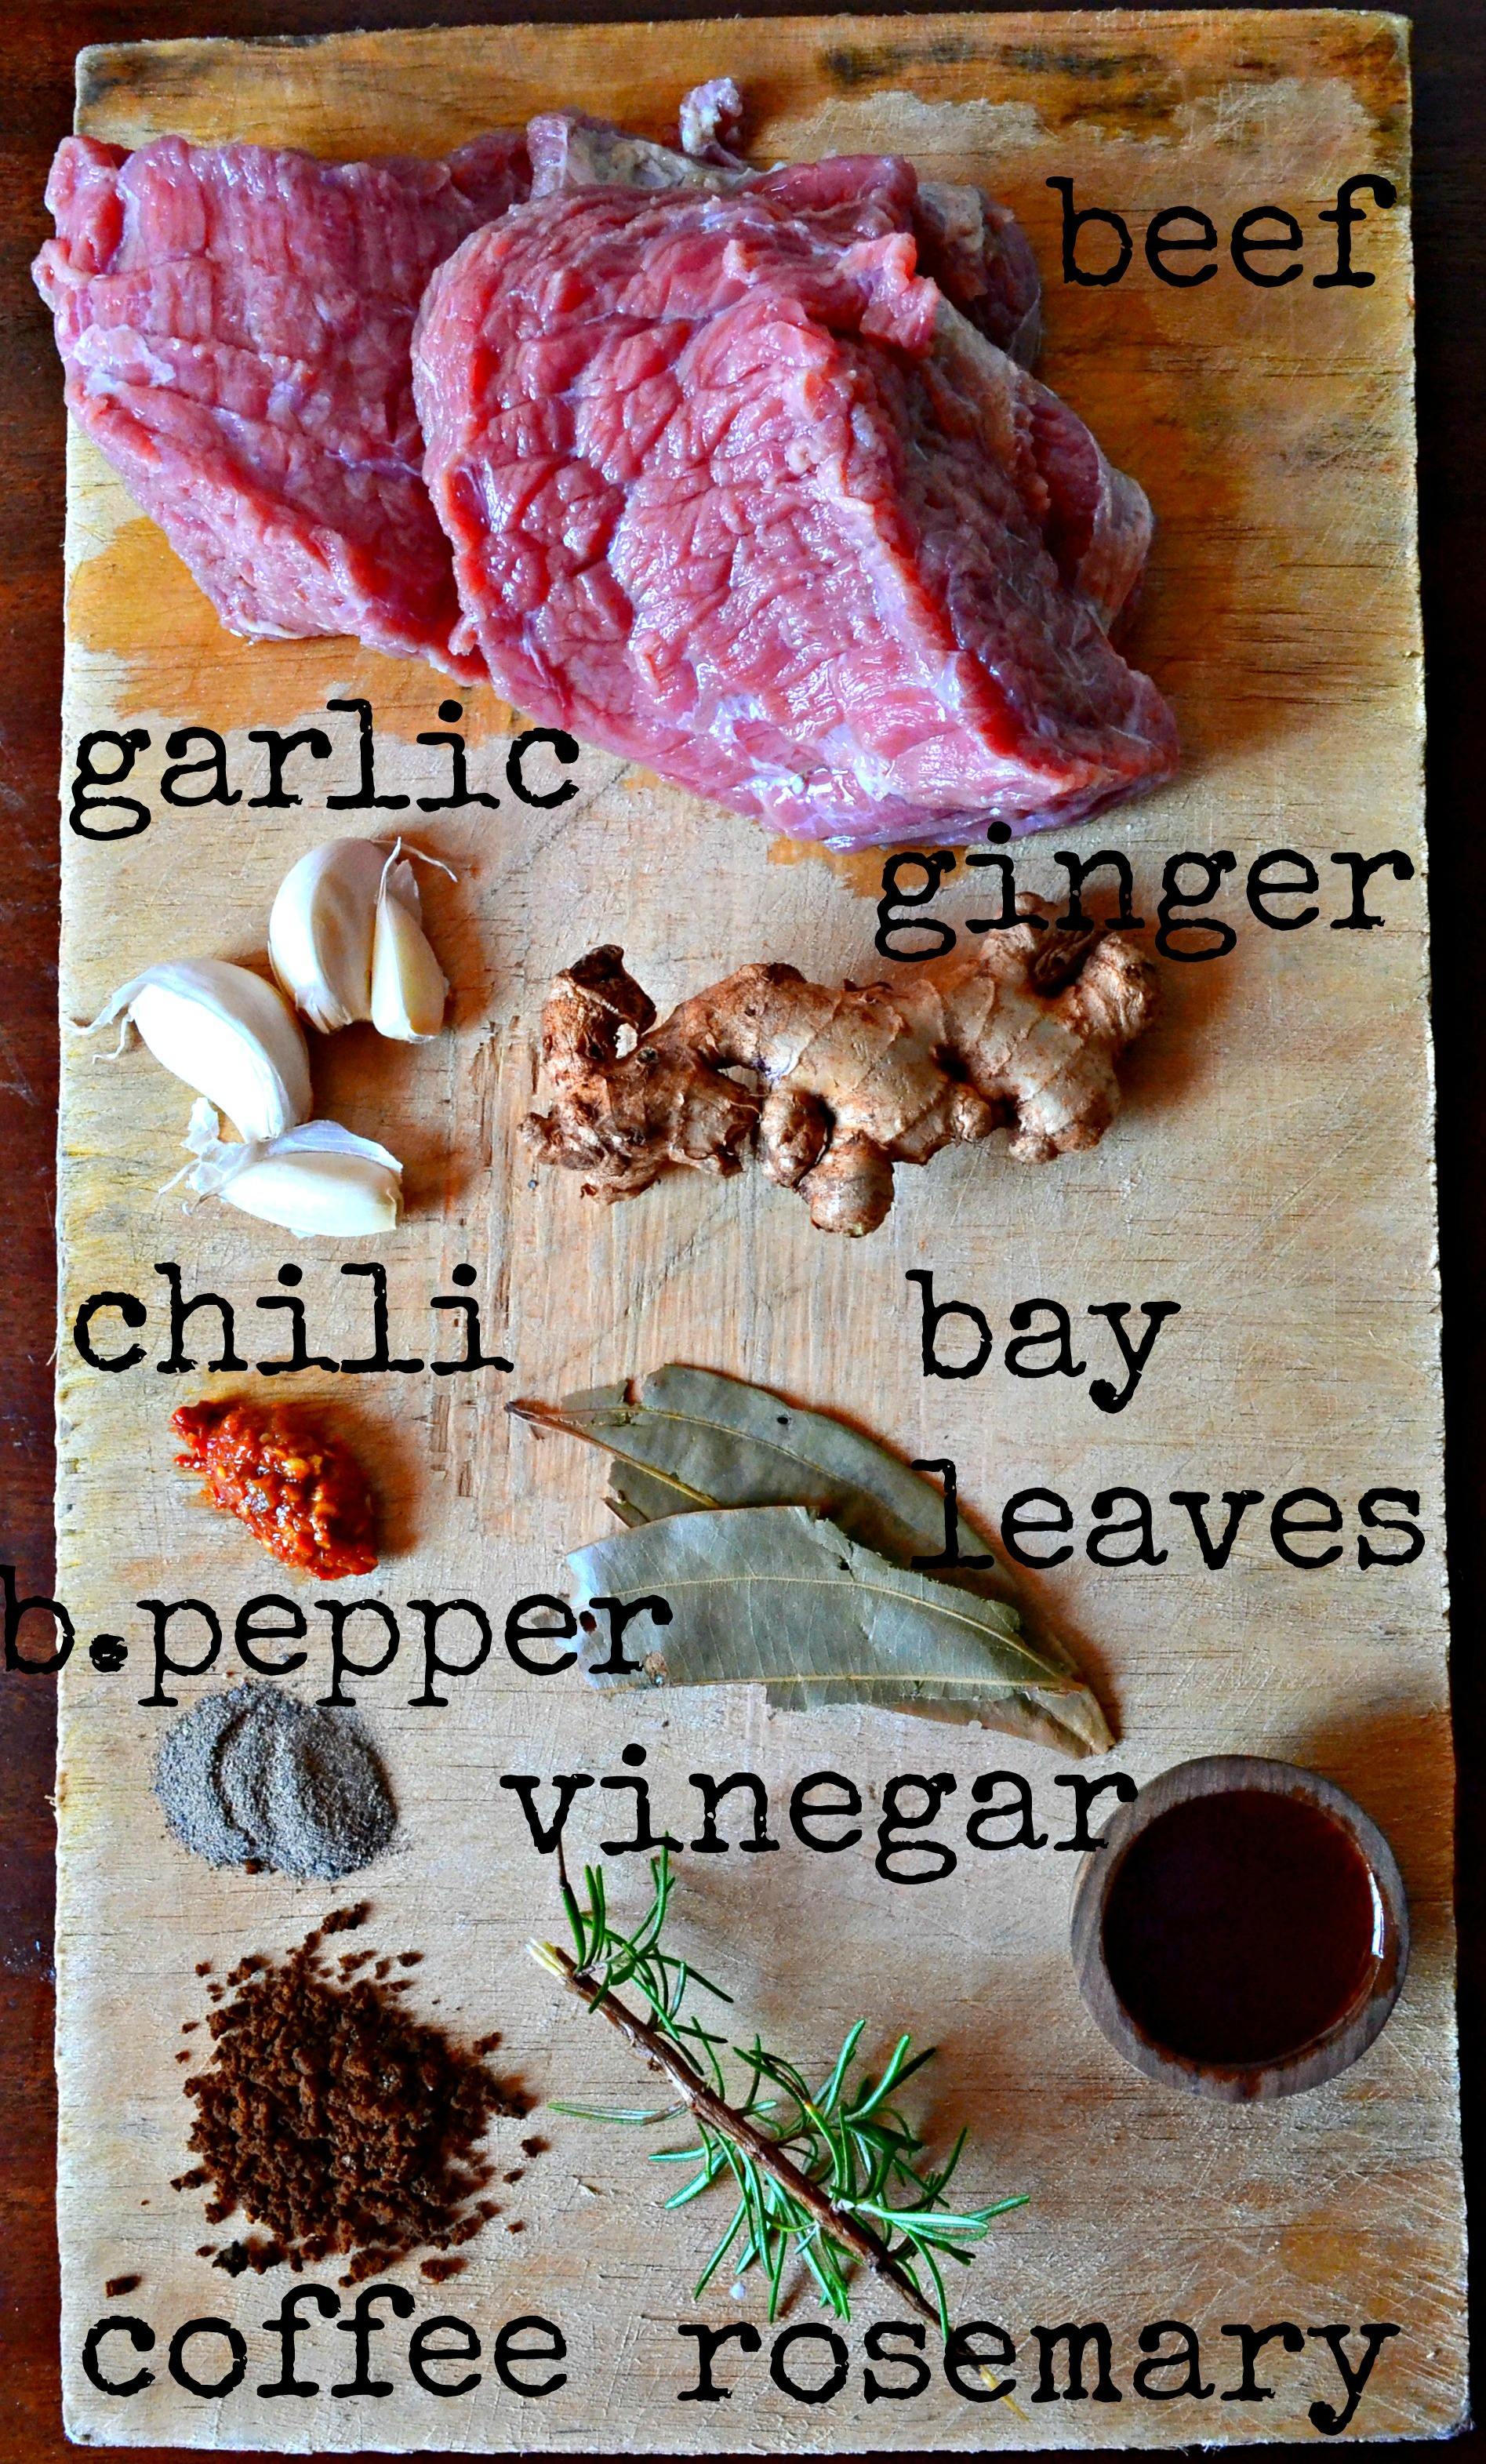 chili-and-cofffee-marinated-beef-dry-fry_kaluhiskitchen-com_how-to-cook-beed_coffee-marinades_kaluhi-recipes